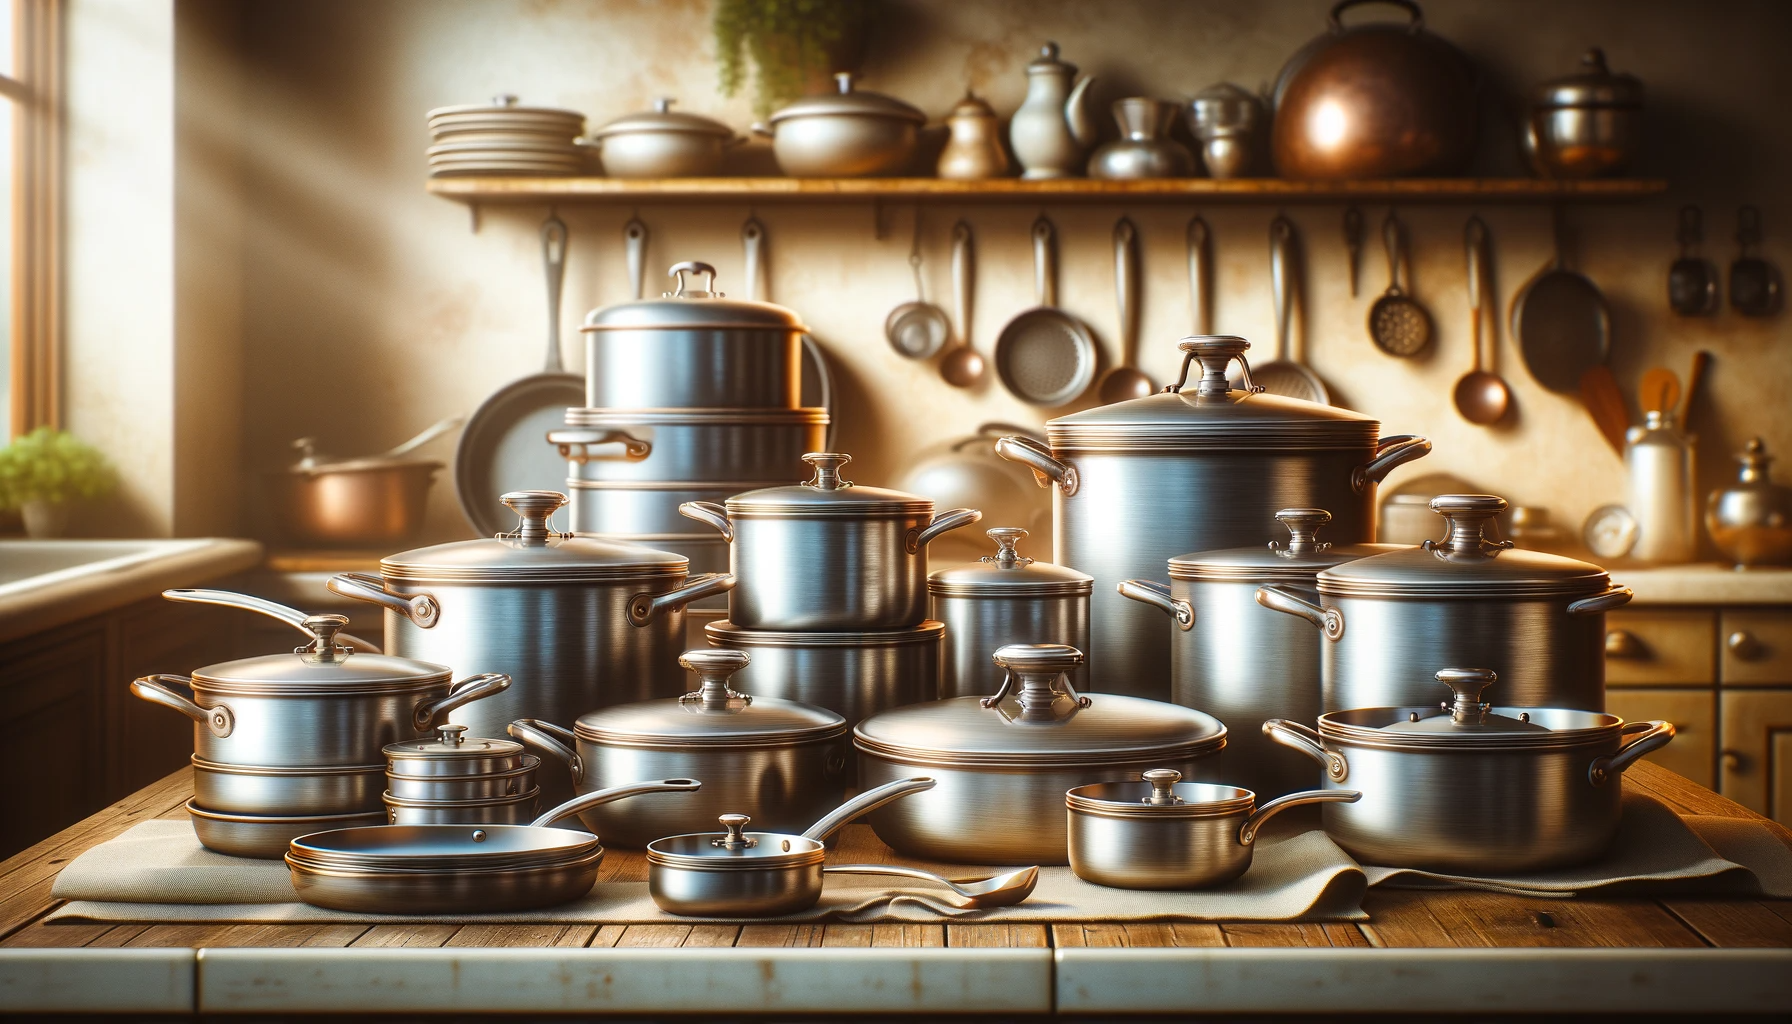 You are currently viewing Can I Still Use Very Old Stainless Steel Cookware Safely?